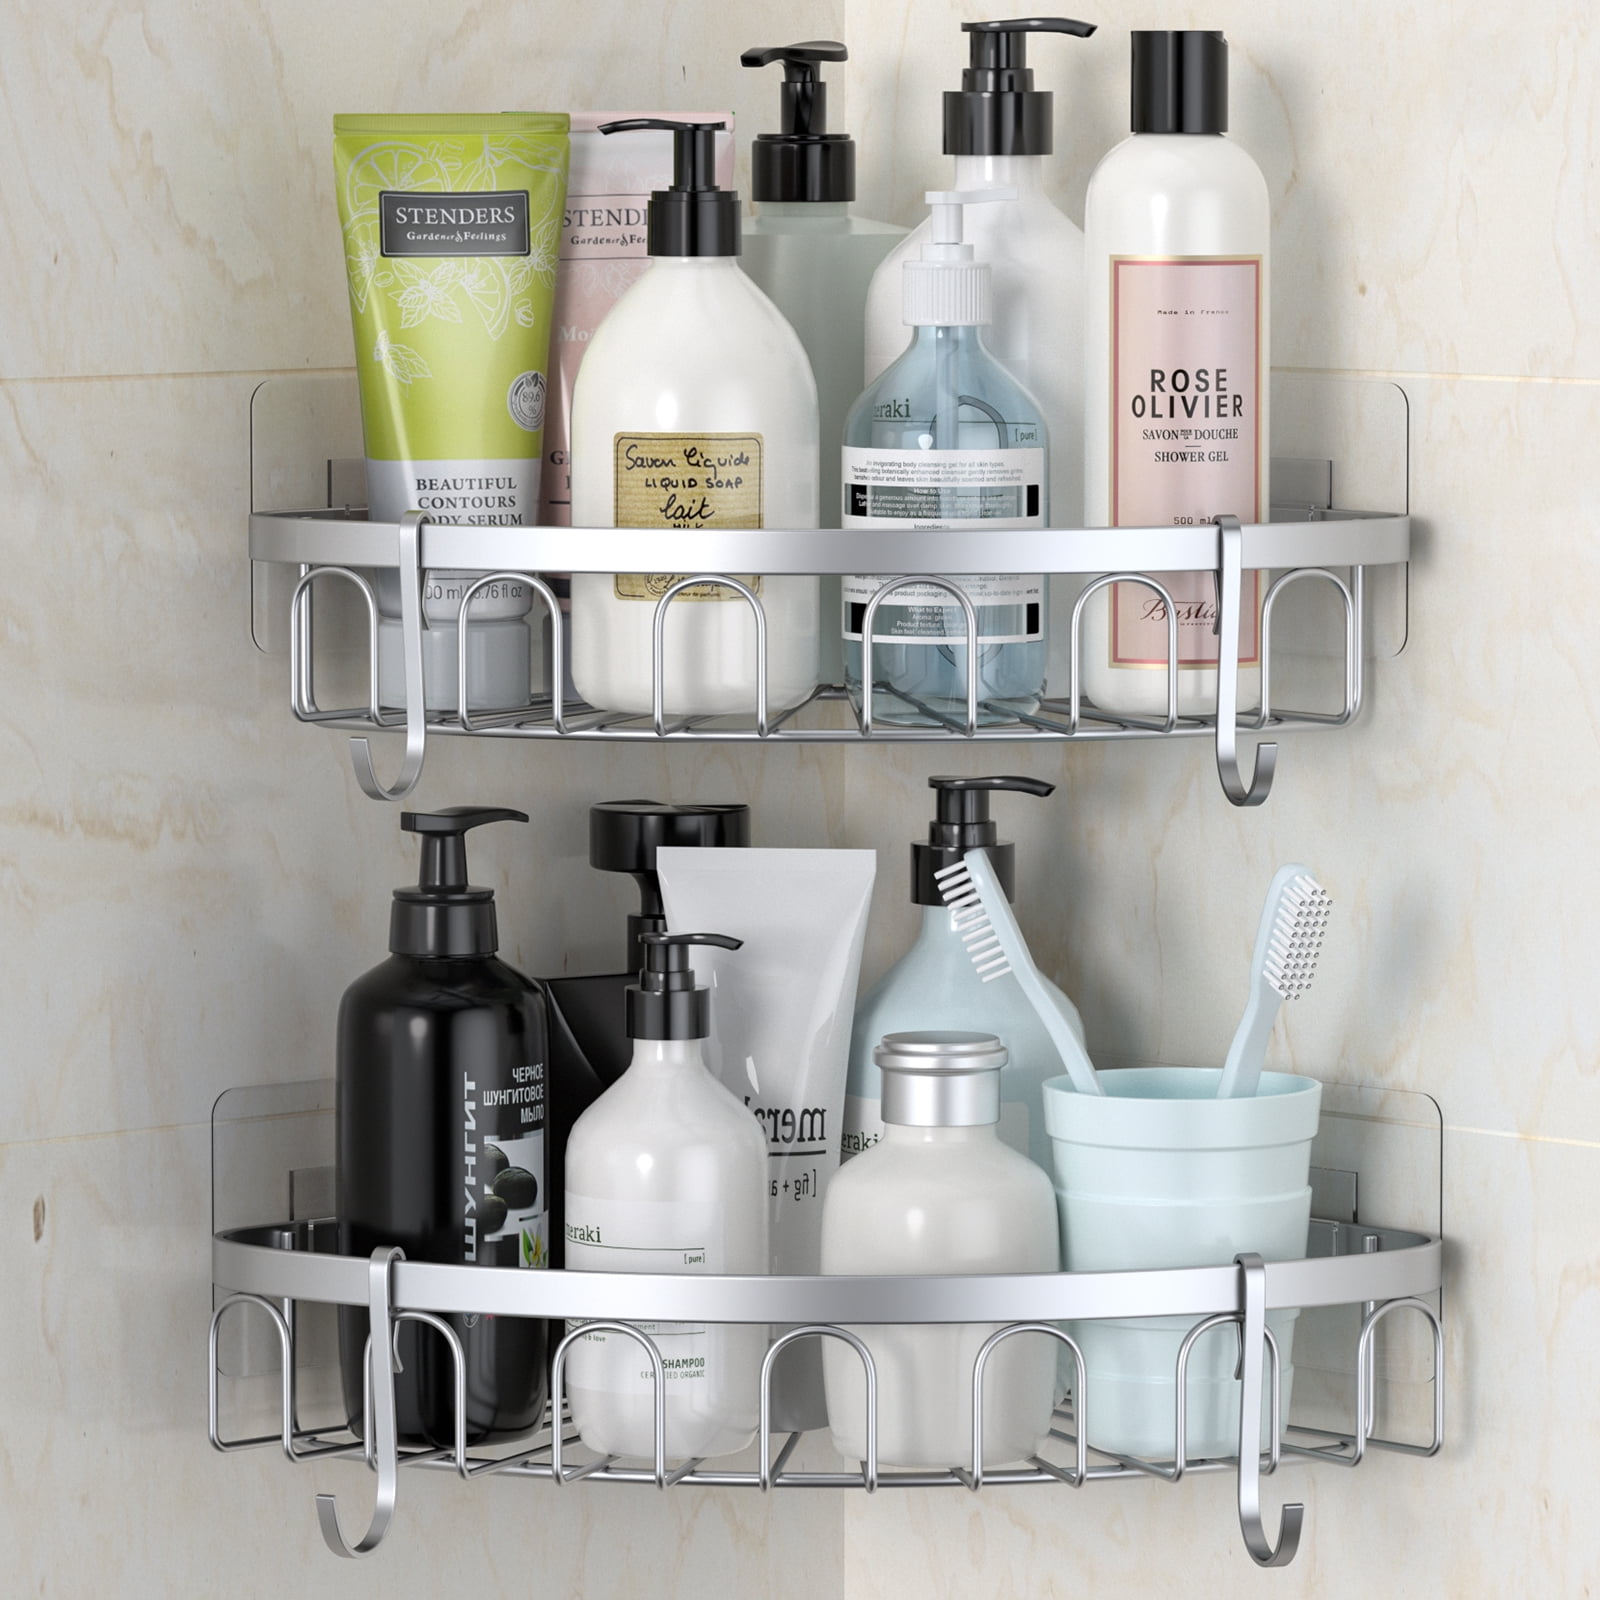 Wall Mount Adhesive Stainless Steel Corner Shower Caddy Organizer Shelf  with 8 hooks in Matte Black 2-Pack